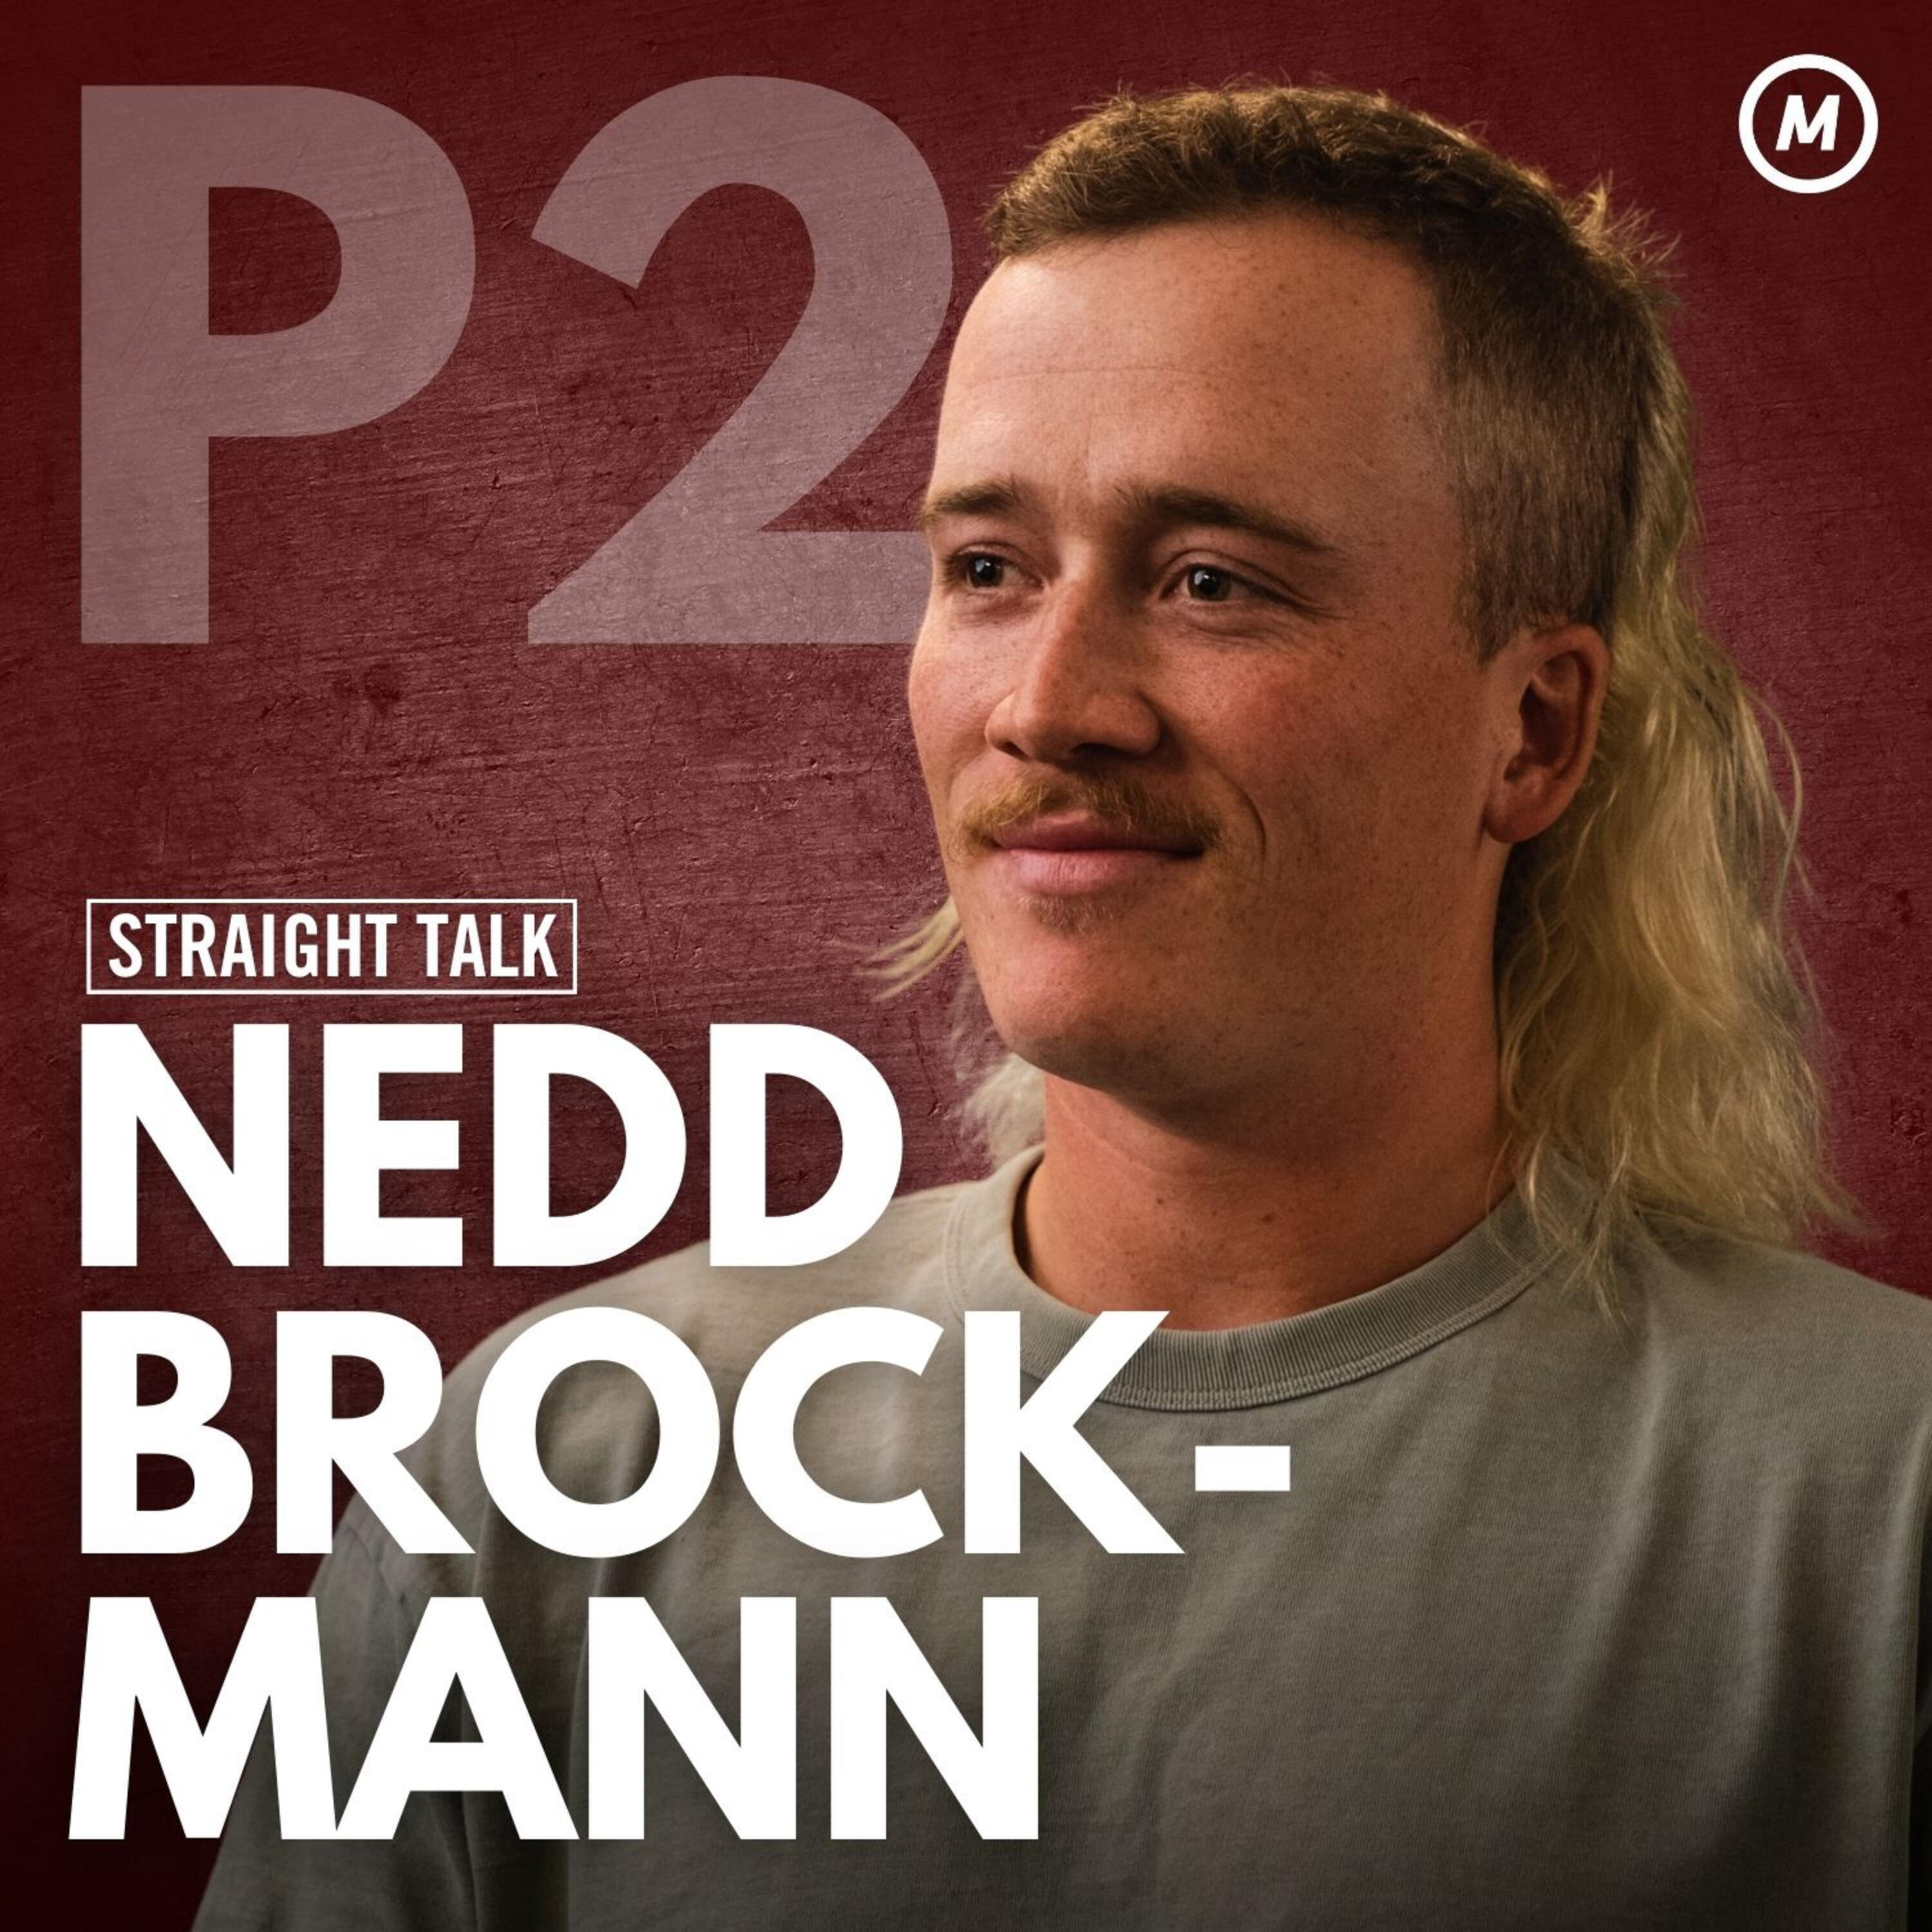 #59 Nedd Brockmann is yet to find his limit after running across Australia – Part 2